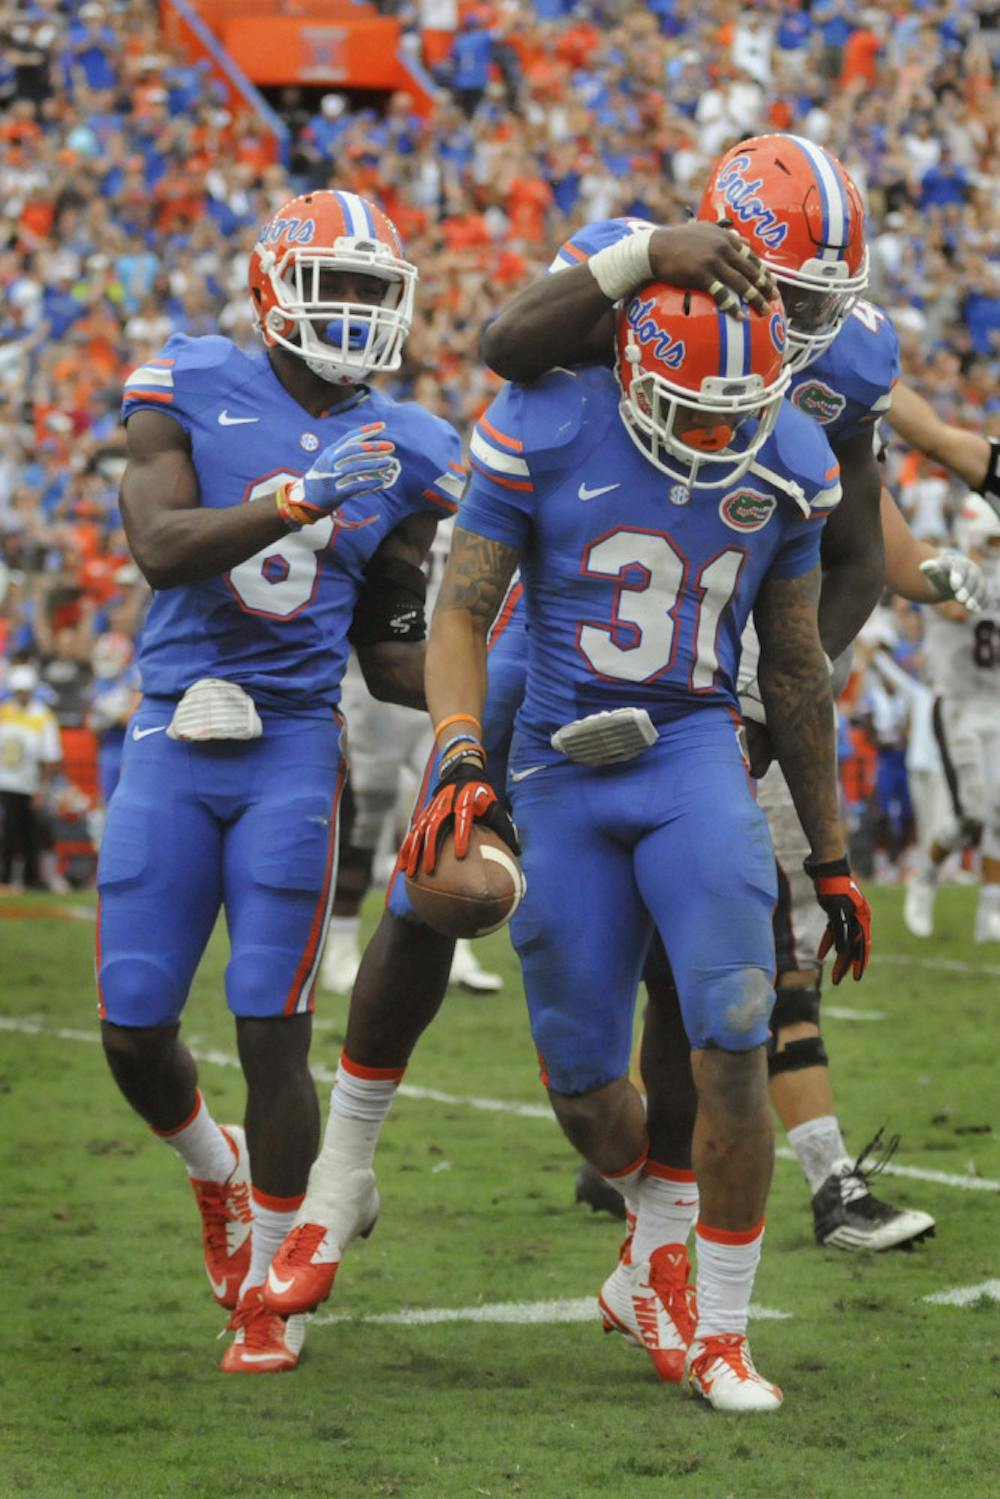 <p>Teammates celebrate with cornerback Jalen Tabor after his interception during Florida's 20-14 overtime win against Florida Atlantic on Nov. 21, 2015, at Ben Hill Griffin Stadium.</p>